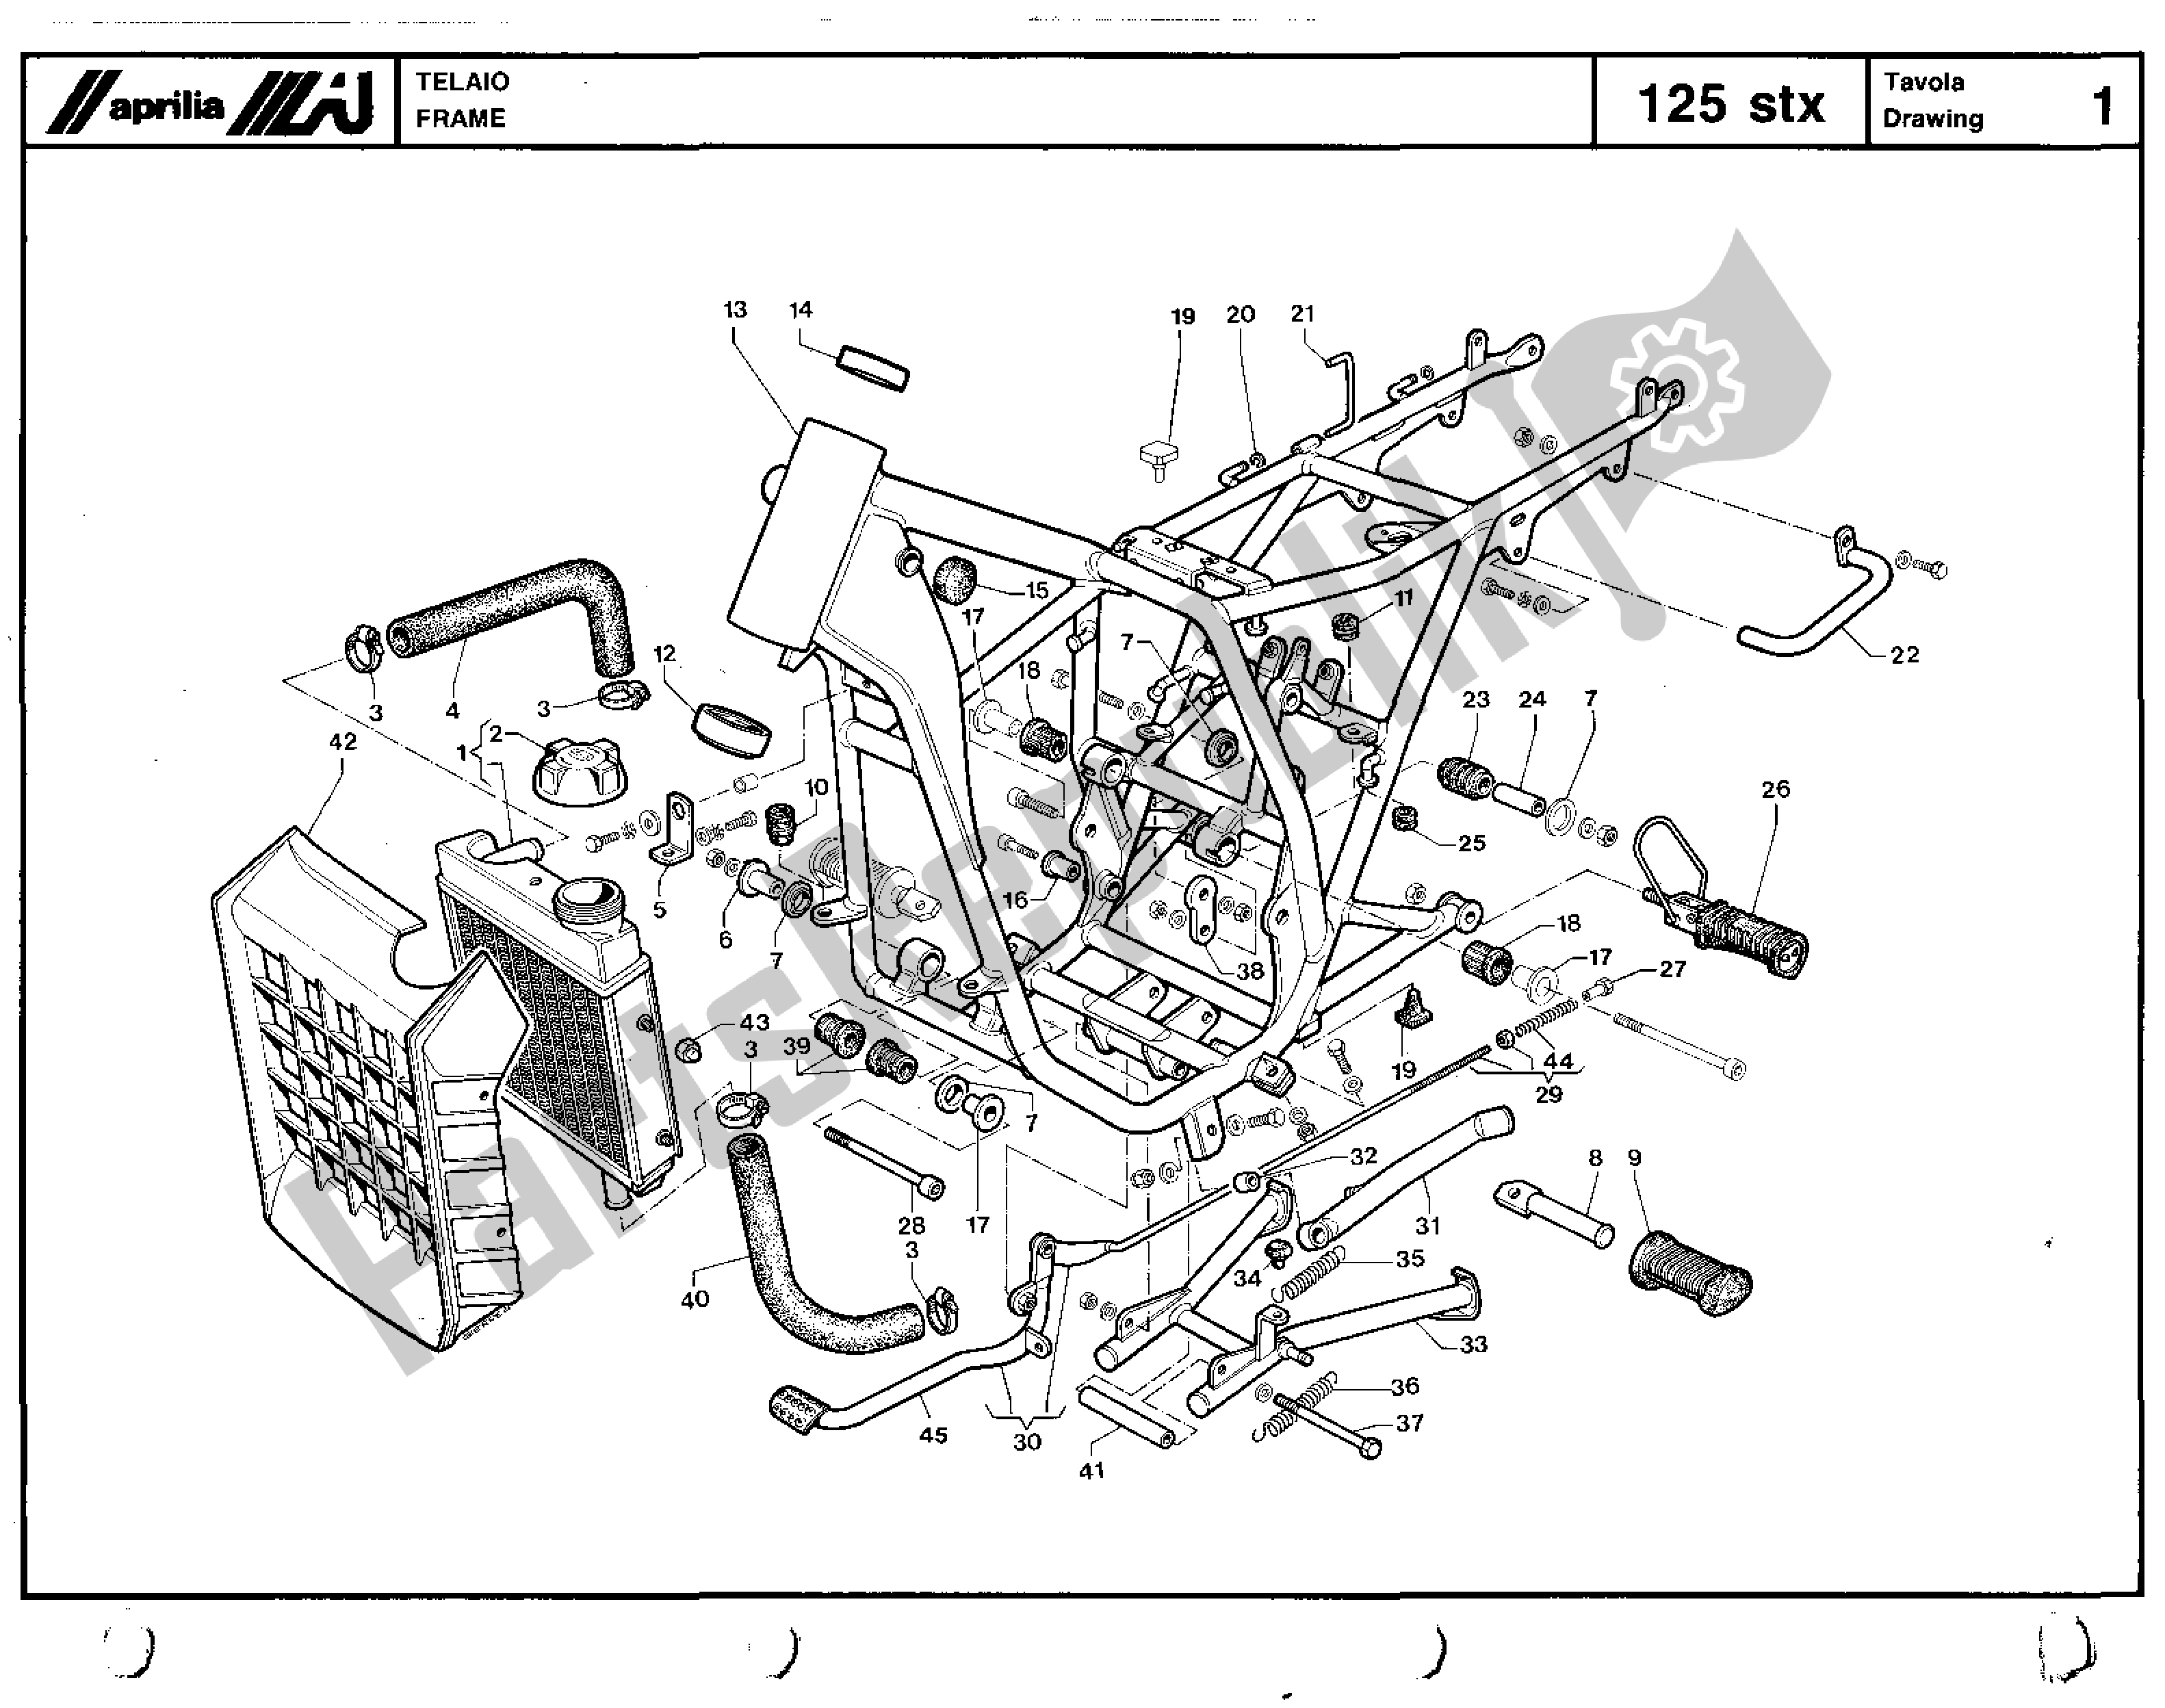 All parts for the Frame of the Aprilia STX 125 1984 - 1986